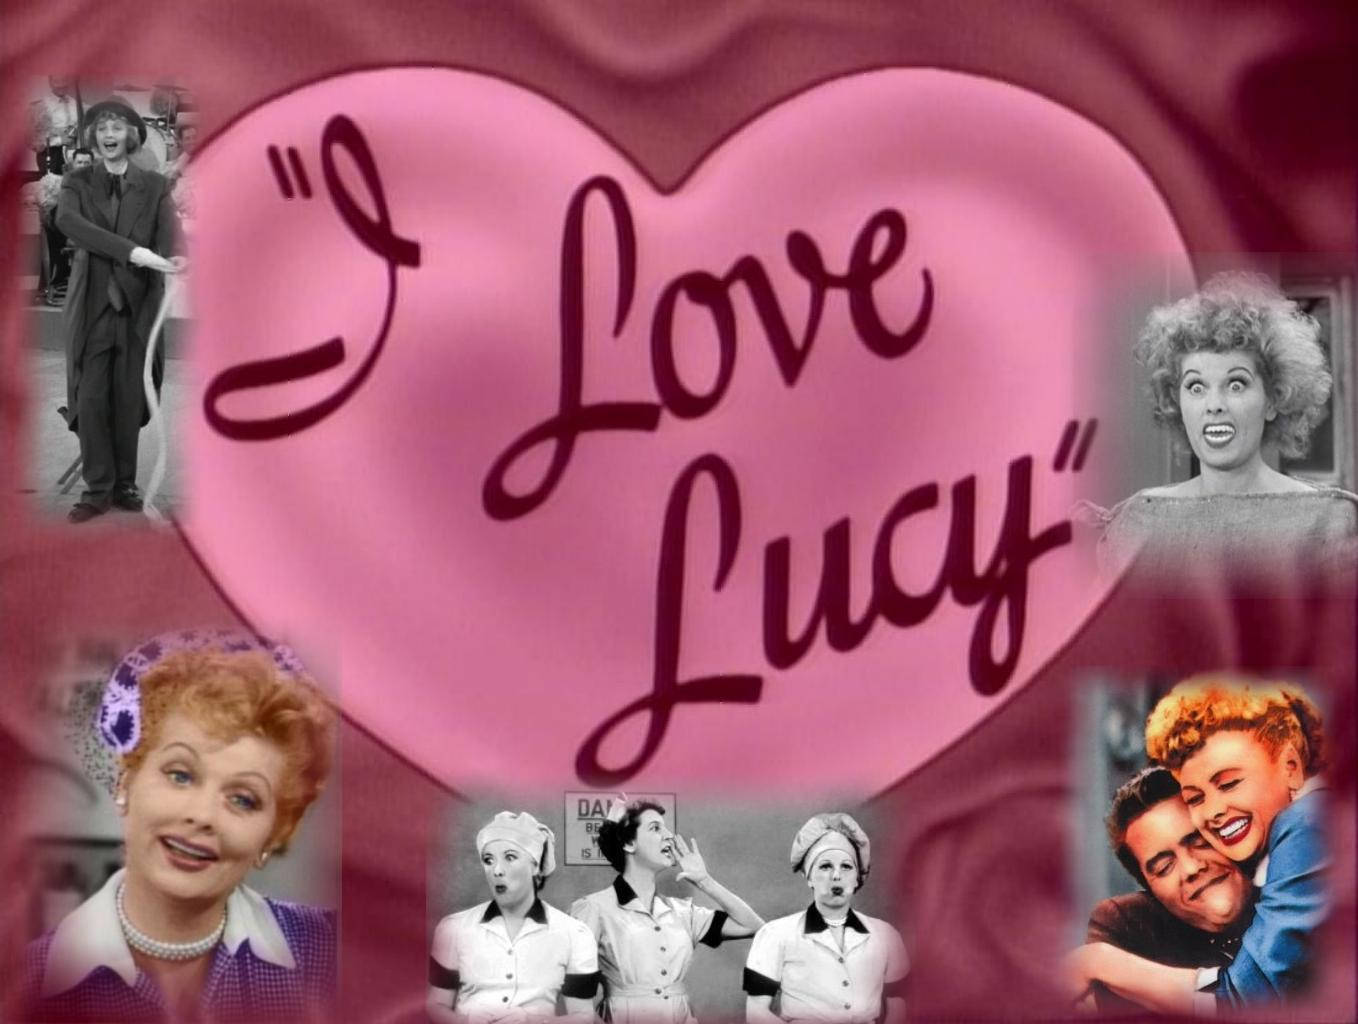 Lucille Ball In A Heart-shaped Collage Reminiscent Of Her Iconic Show, I Love Lucy Background